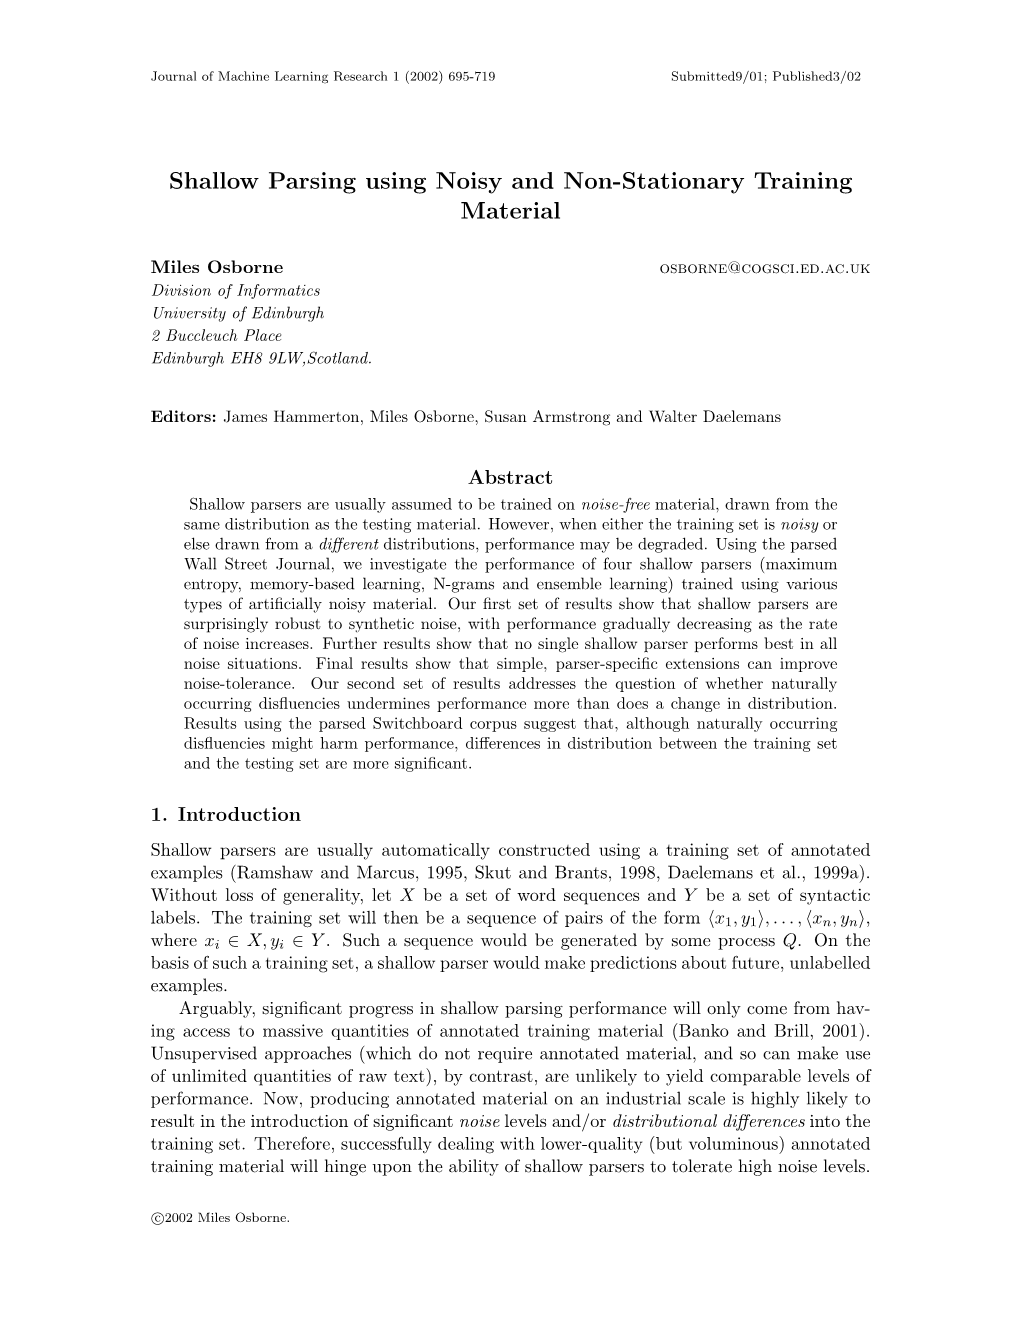 Shallow Parsing Using Noisy and Non-Stationary Training Material